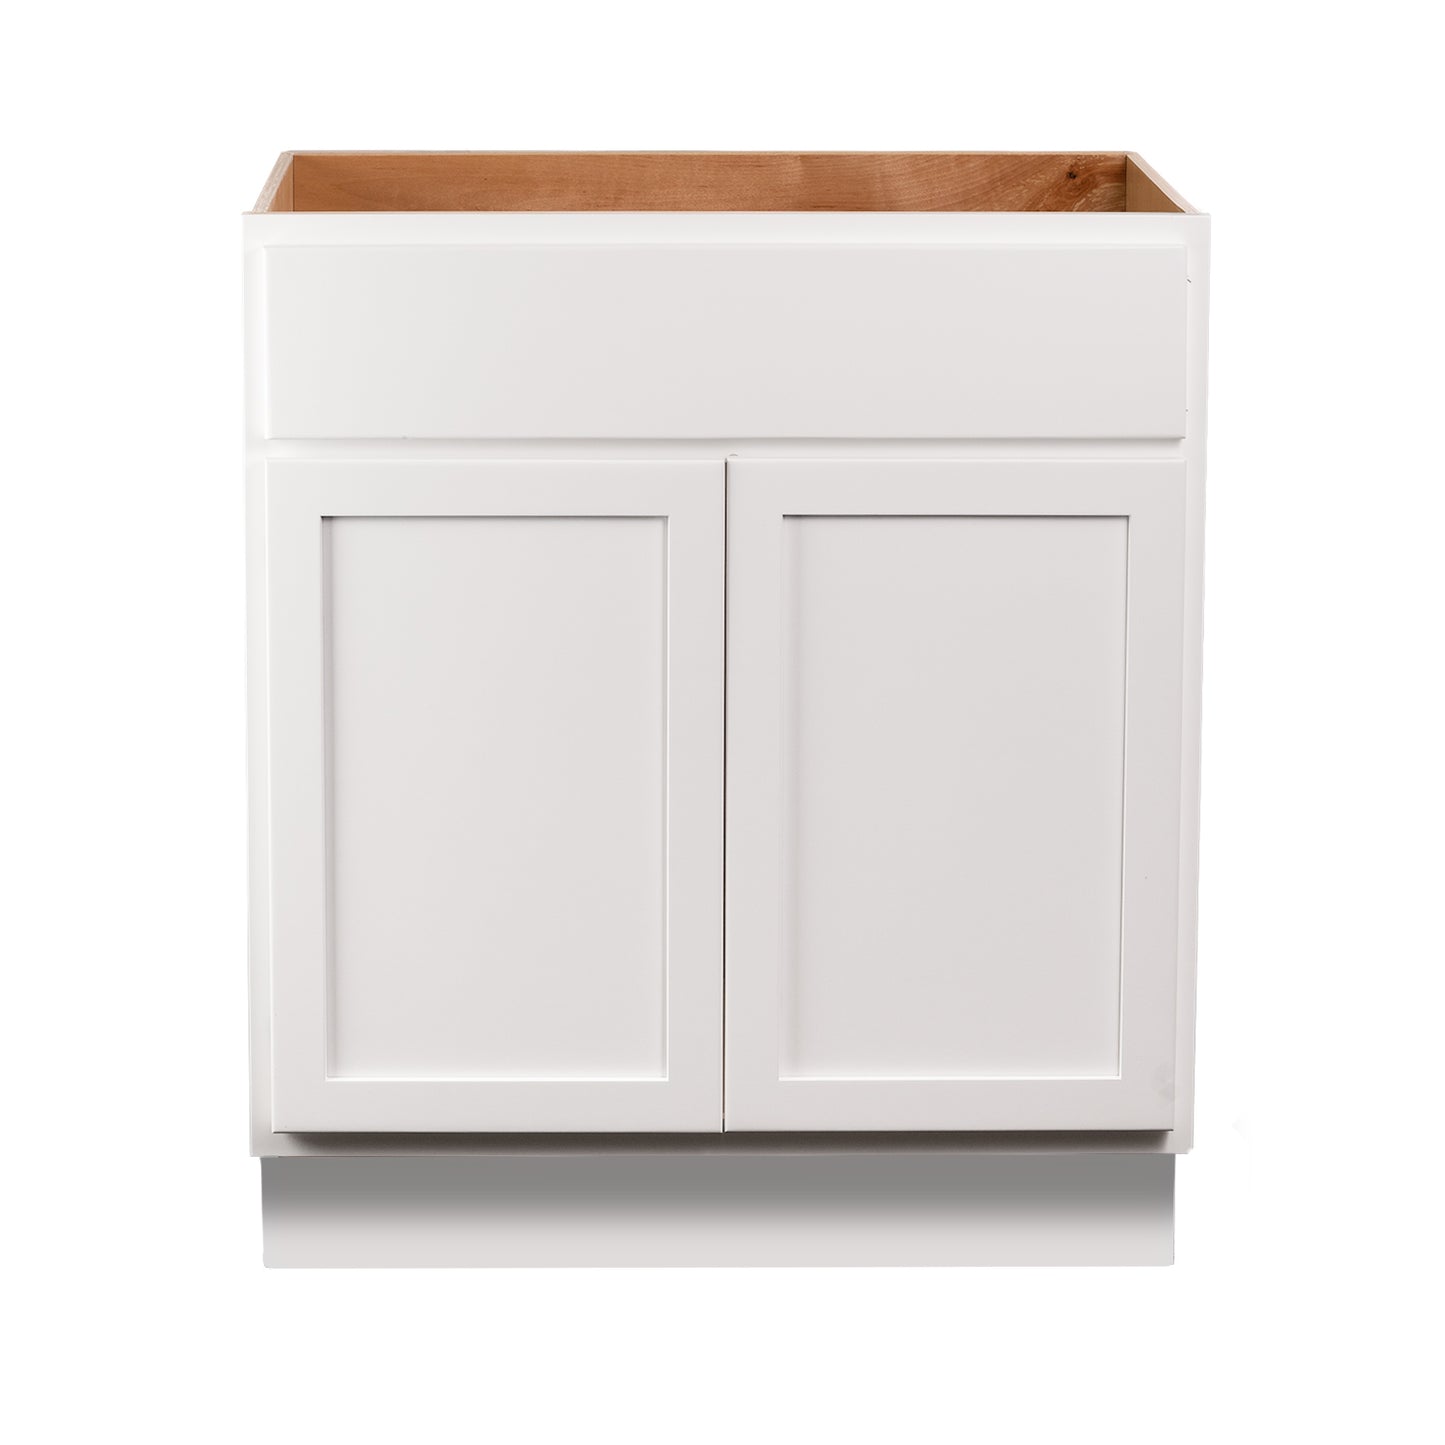 Quicklock RTA (Ready-to-Assemble) Pure White Vanity Base Cabinet | 42"Wx34.5"Hx21"D